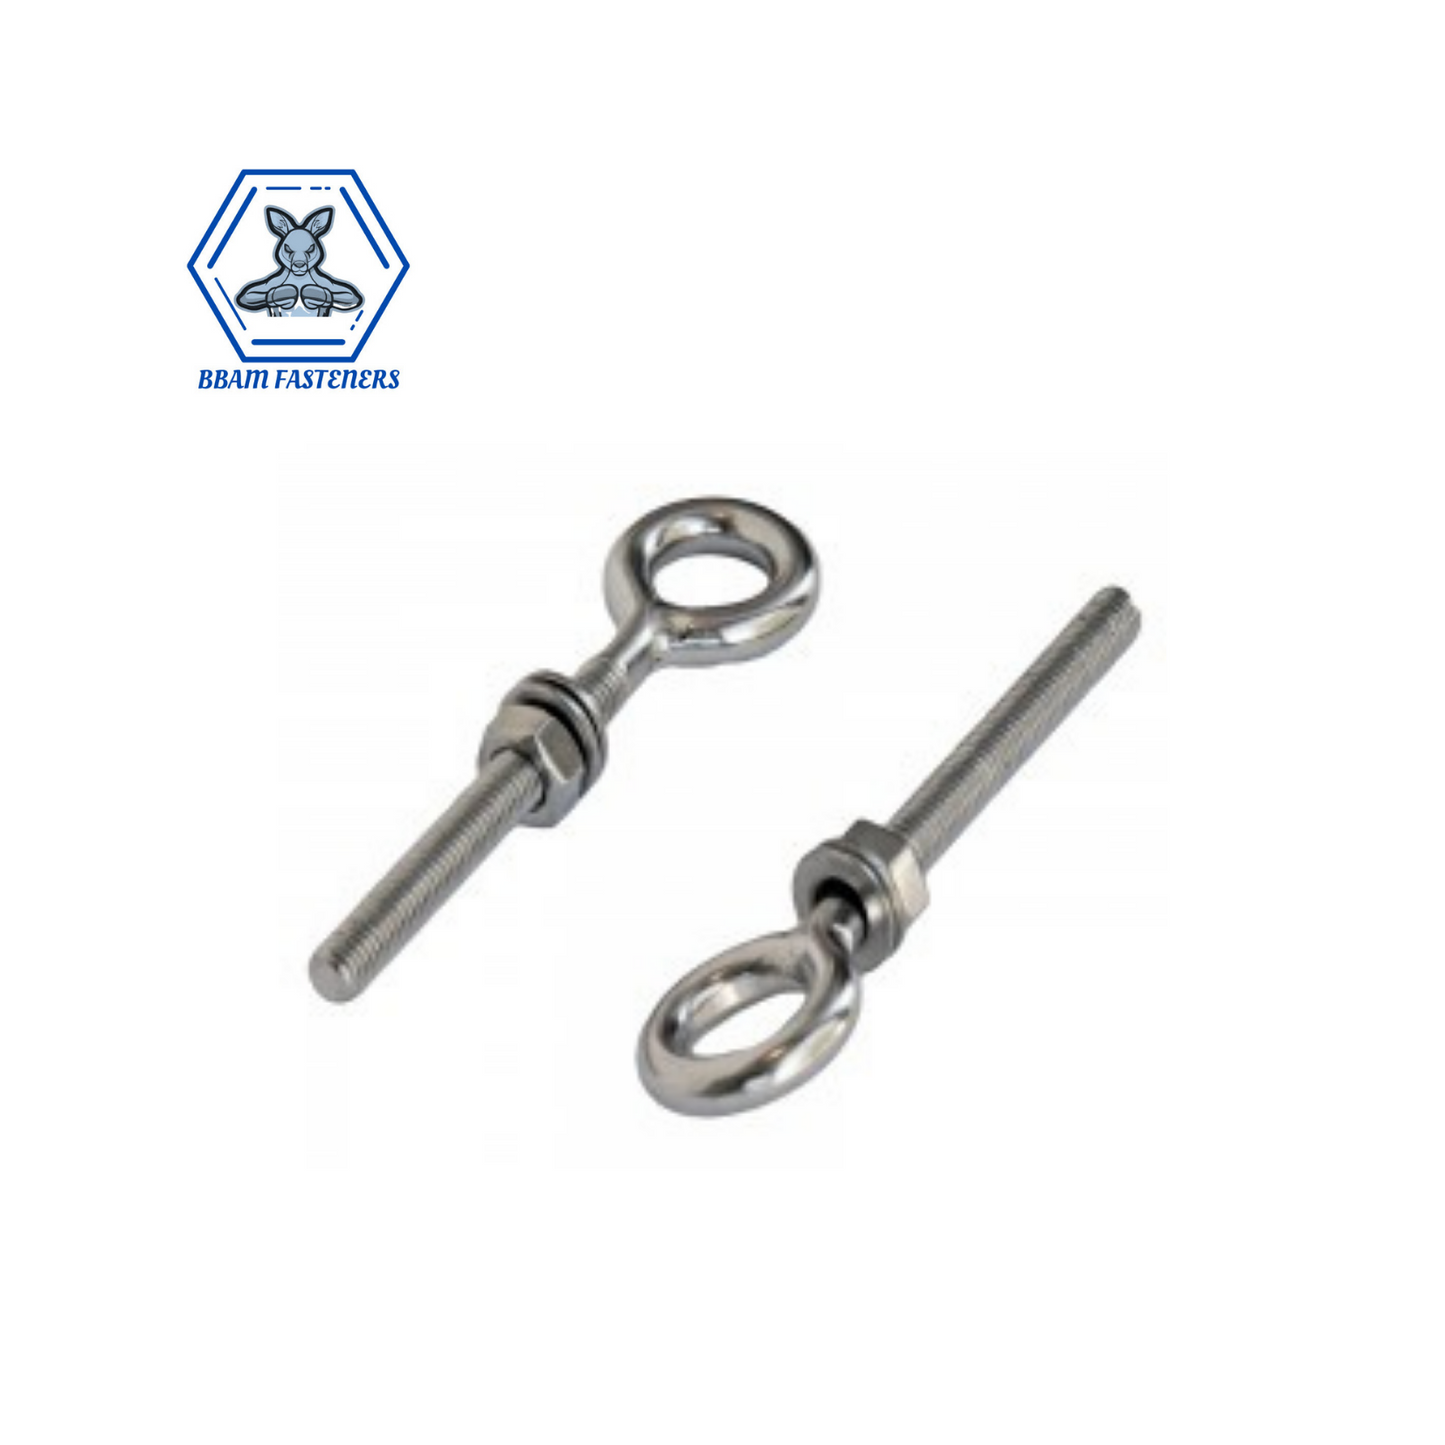 M8 x 130mm Eyebolt with Nut & Washer Stainless Steel